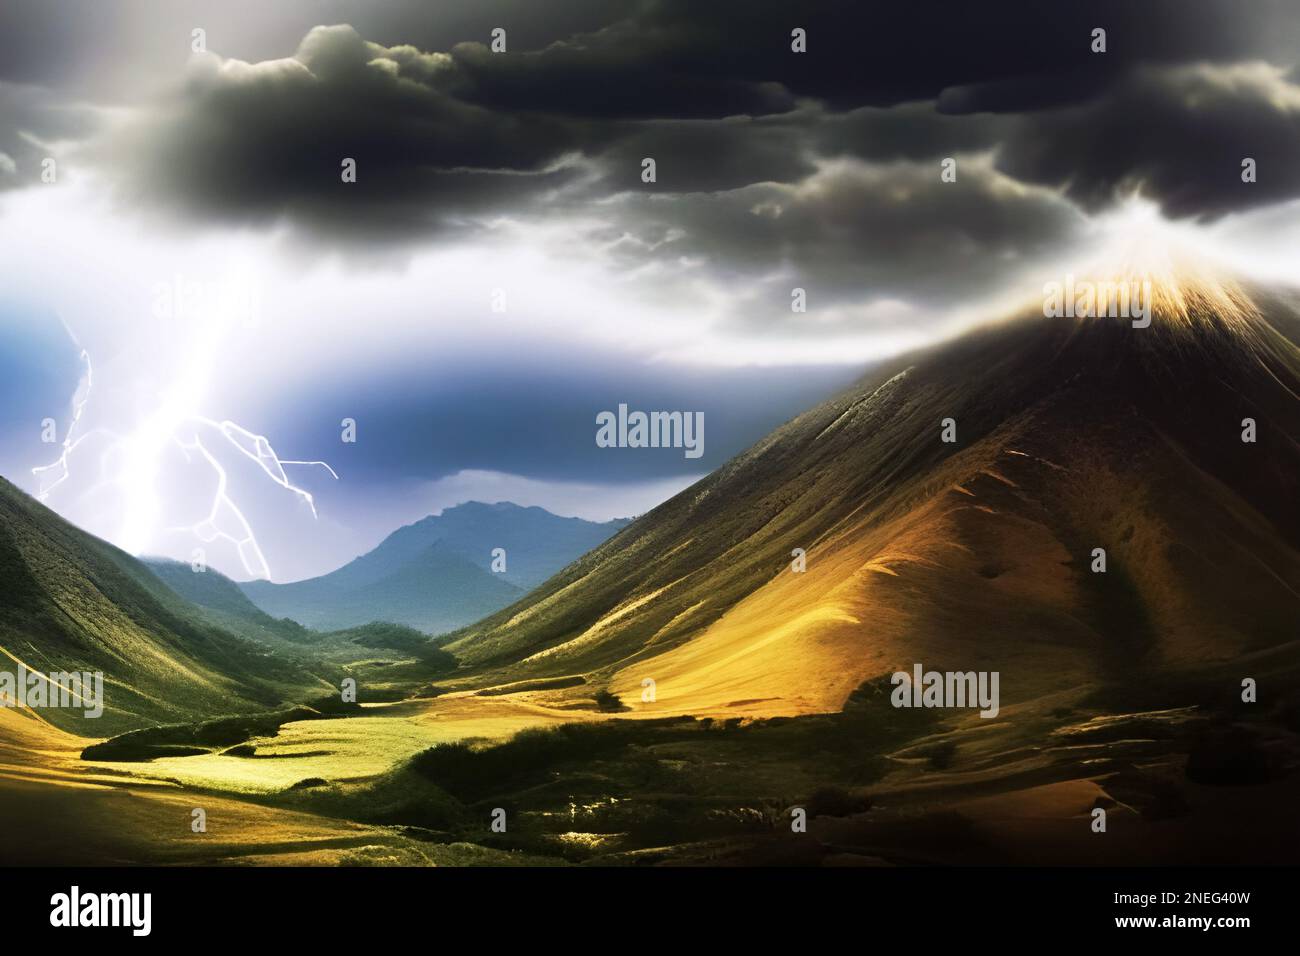 Mountains and valley with lightning storm in the distance. Edited AI generated image Stock Photo